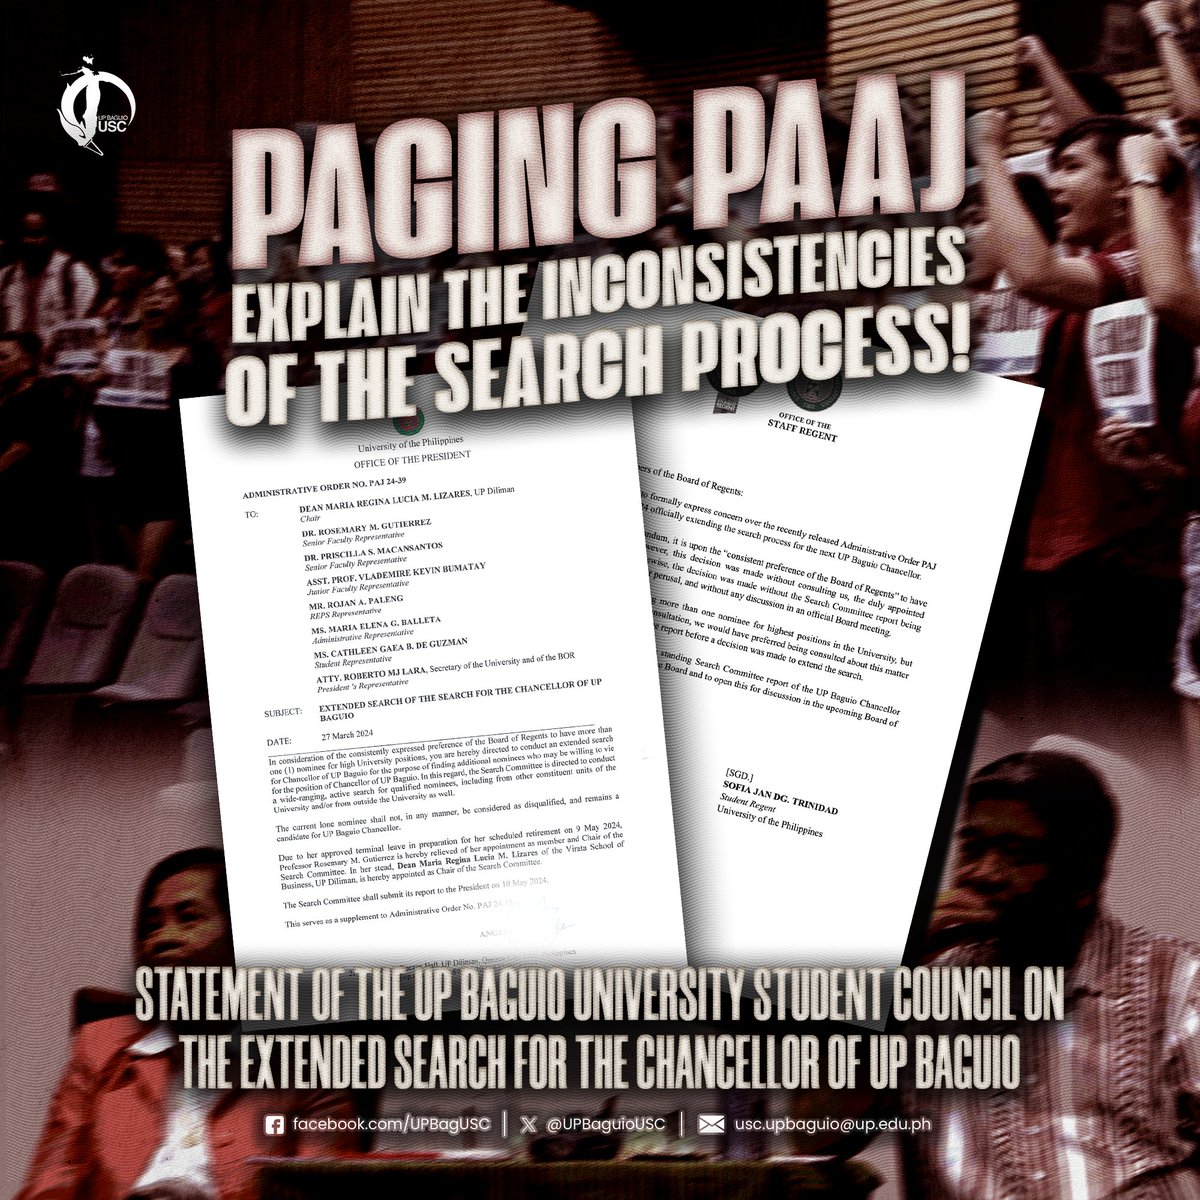 PAGING PAAJ, EXPLAIN THE INCONSISTENCIES OF THE SEARCH PROCESS! 

The UP Baguio University Student Council demands UP President Angelo “Jijil” Jimenez to explain and clarify the inconsistencies of the Search Process for the Chancellorship. 

#BORHeedTheCall 
#BORDecideNOW